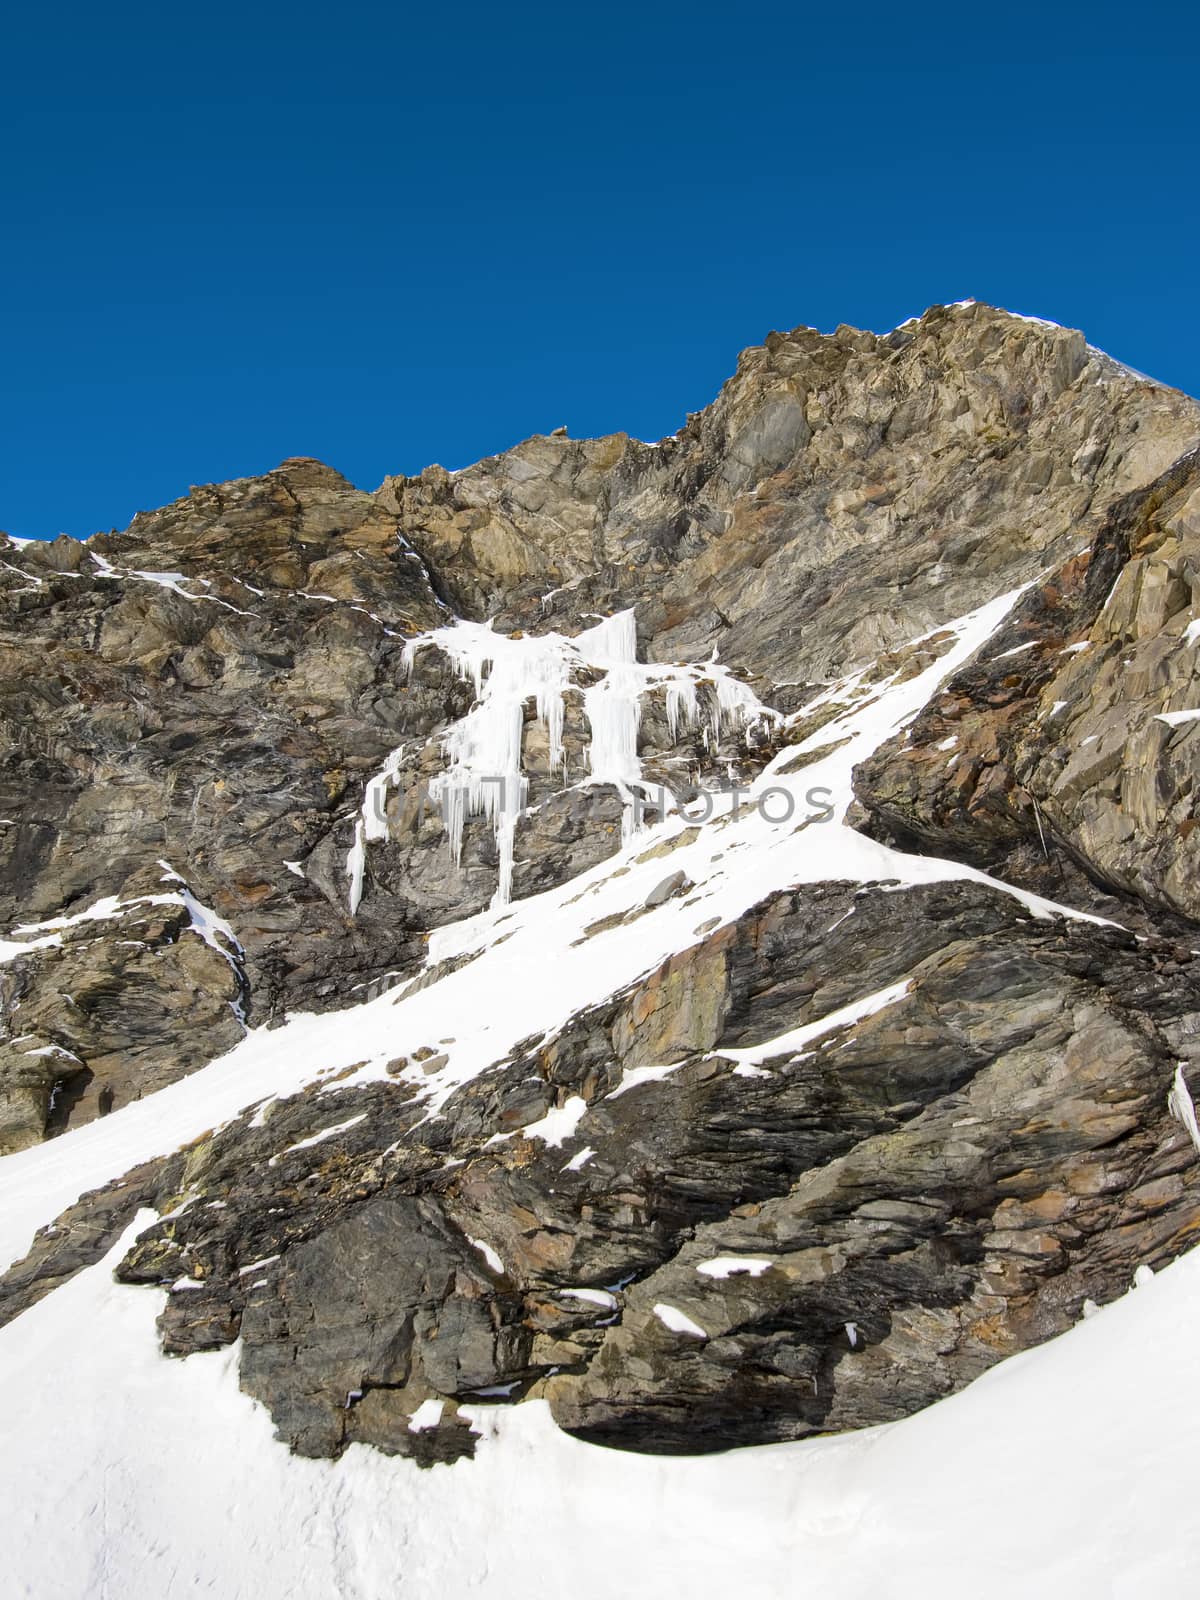 A frozen waterfall at the top of an alpine mountain